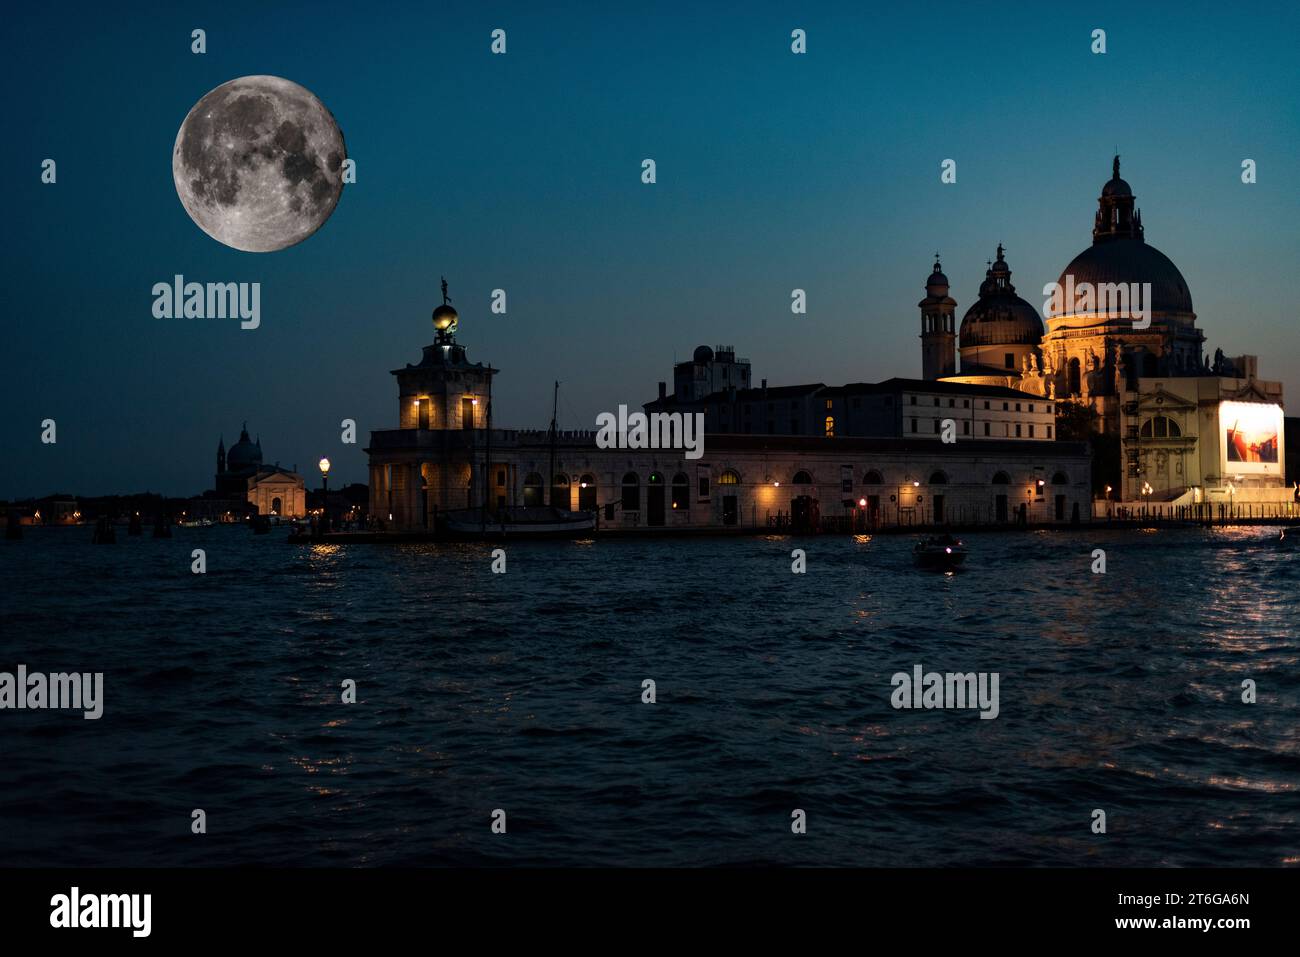 Super moon in Grand Canal, Venice italy Stock Photo